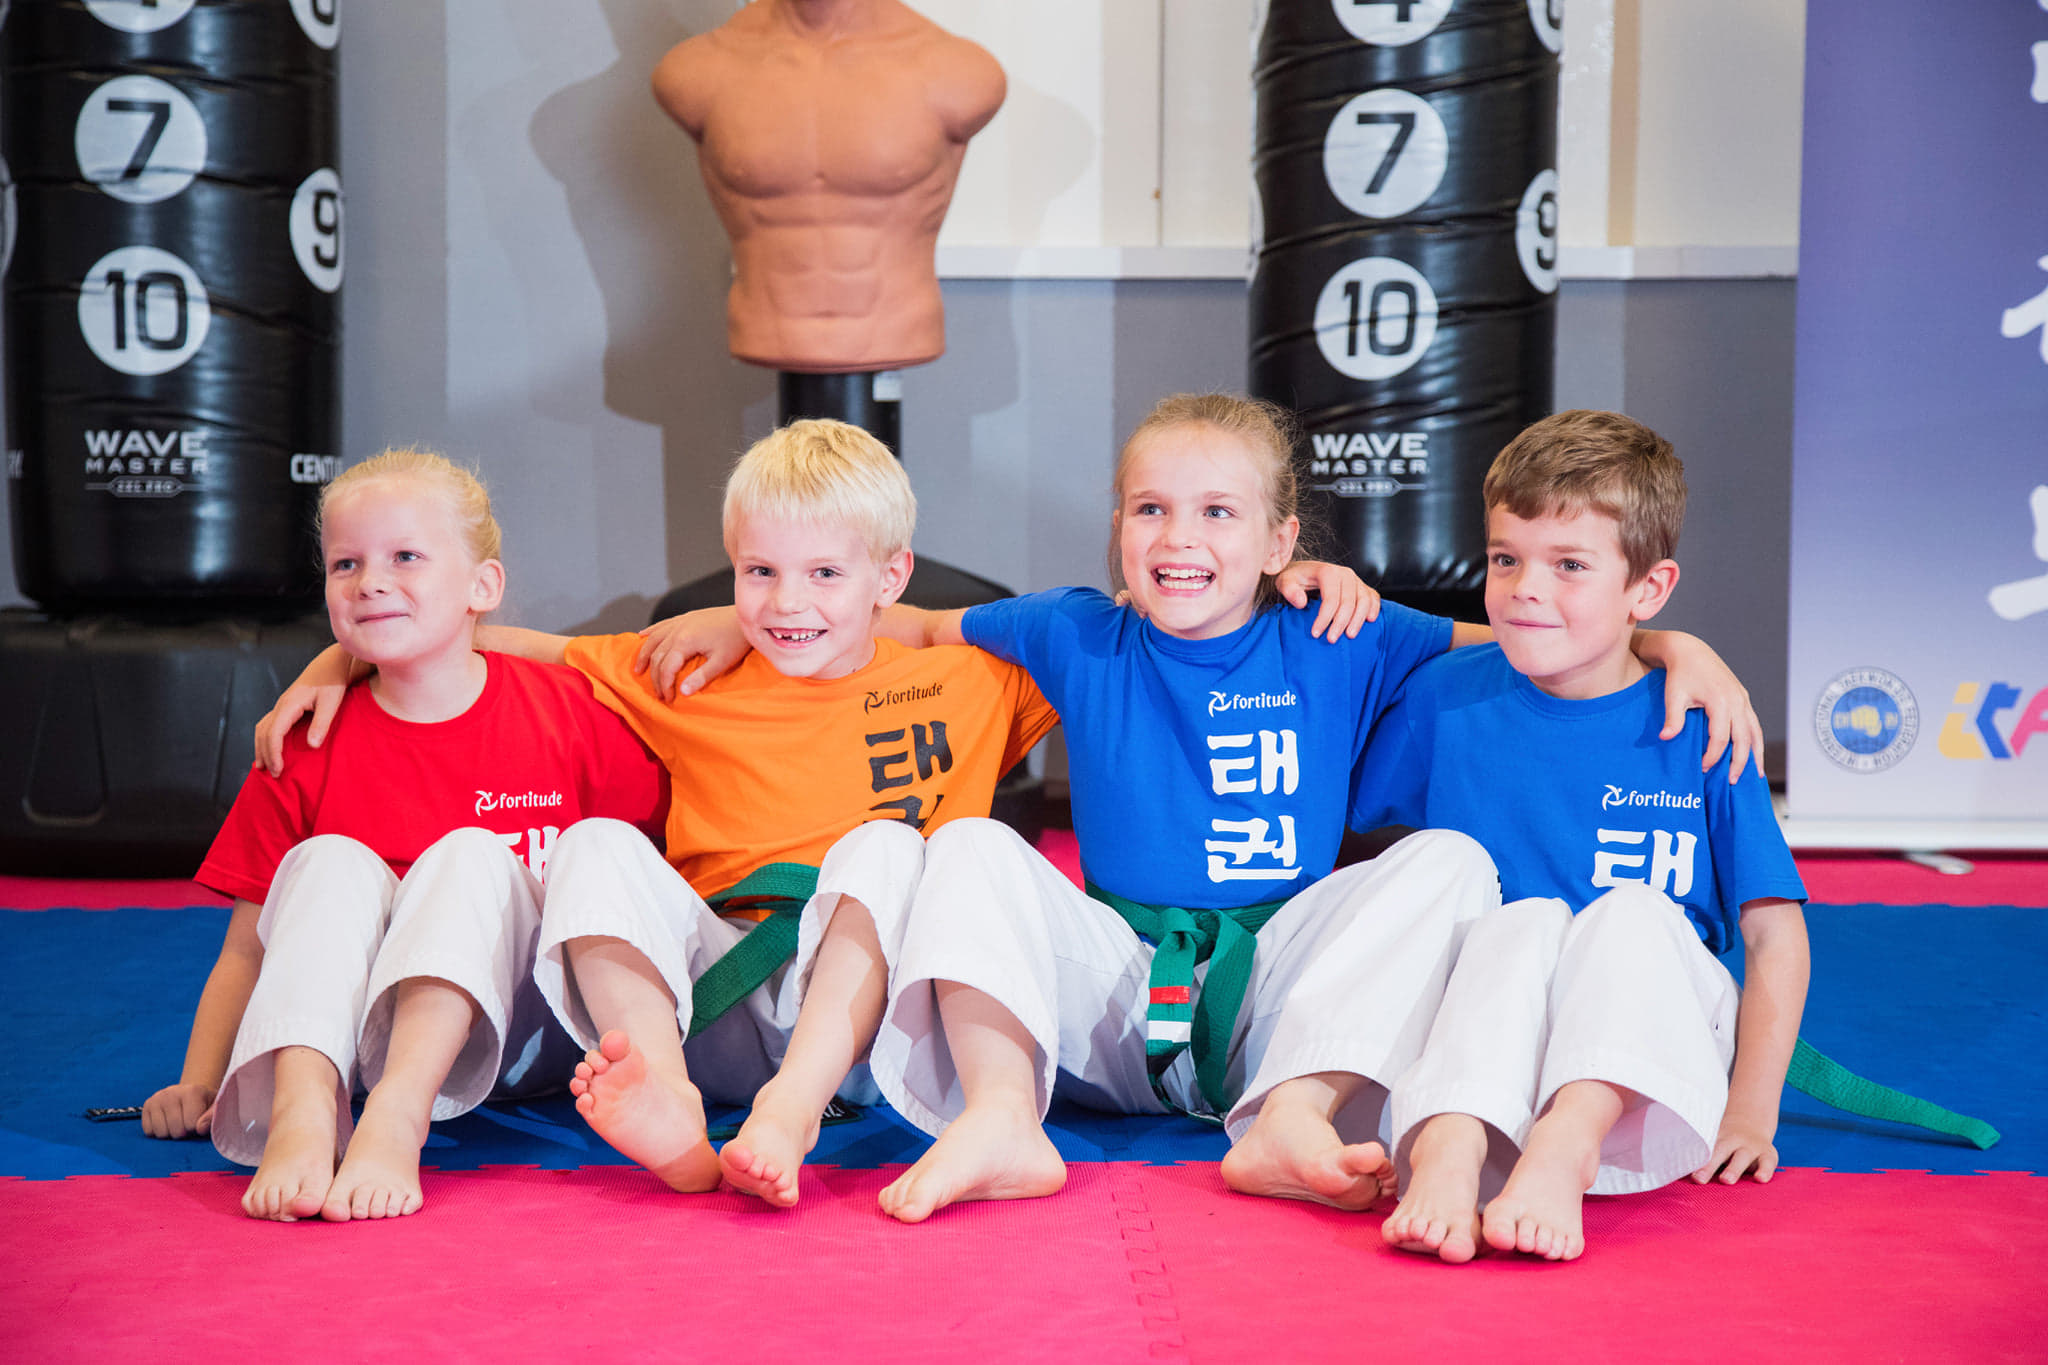 Fortitude Martial Arts in Kent, Sussex and Surrey